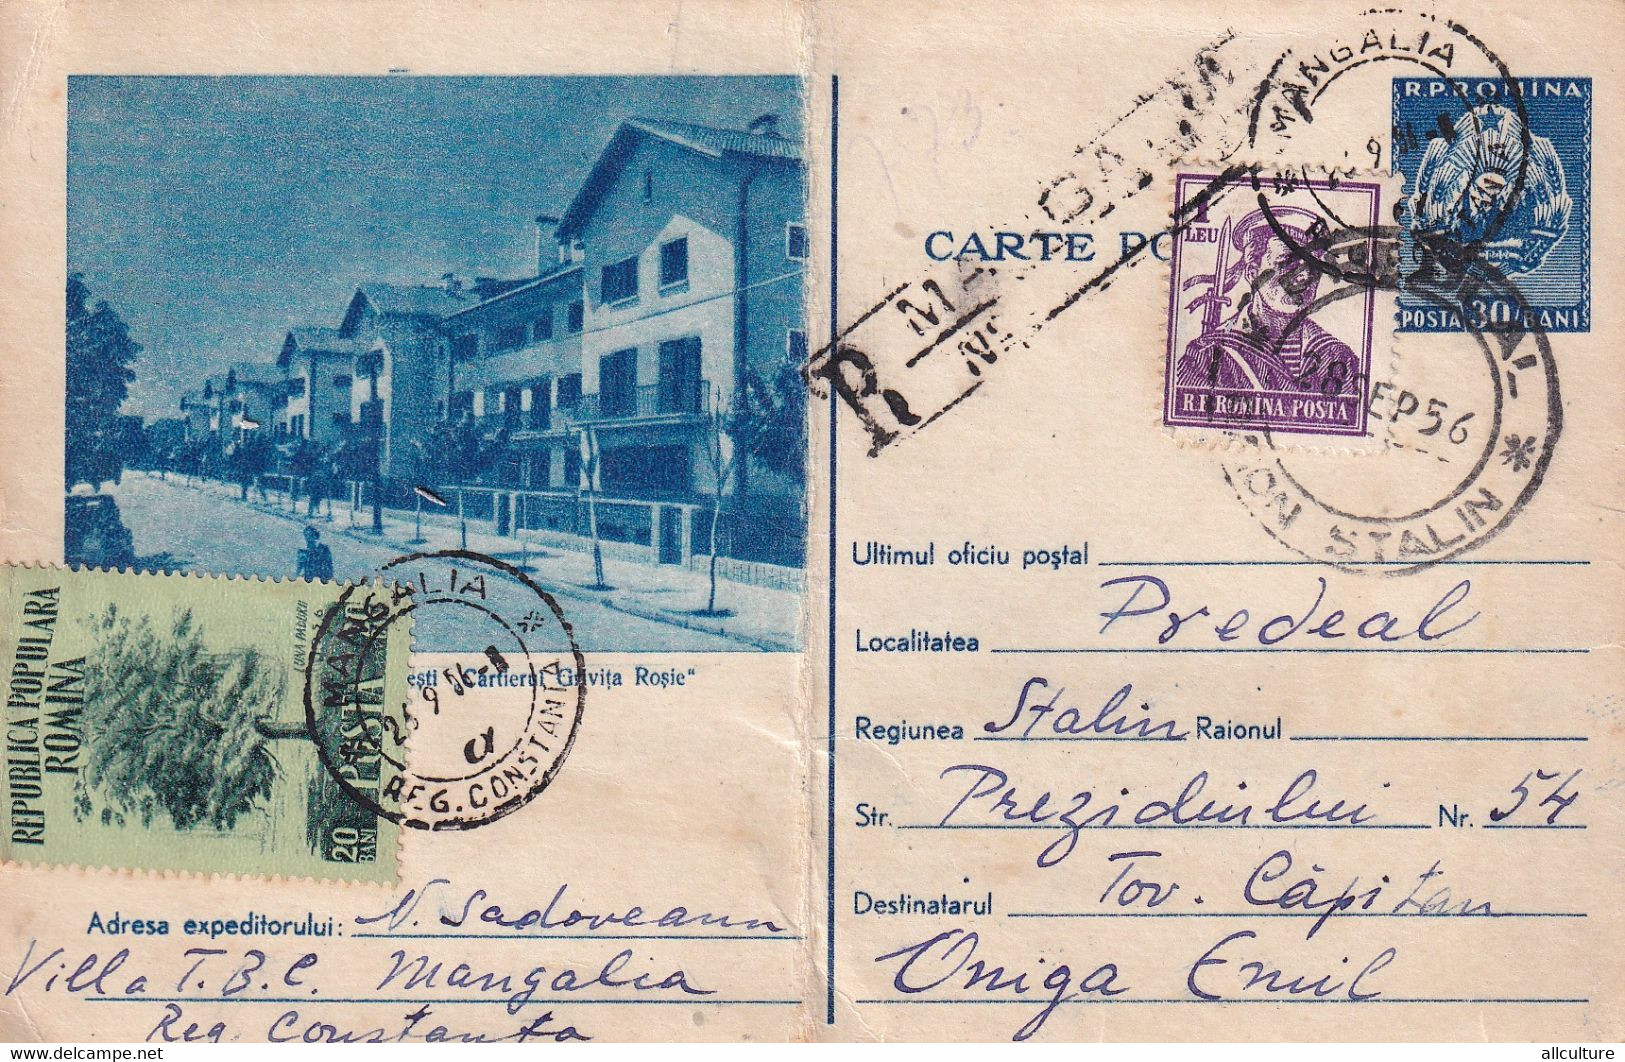 A7938- ROMANIAN PEOPLE'S REPUBLIC, REGISTRED LETTER, MANGALIA 1956 STAMPED STATIONERY - Postal Stationery